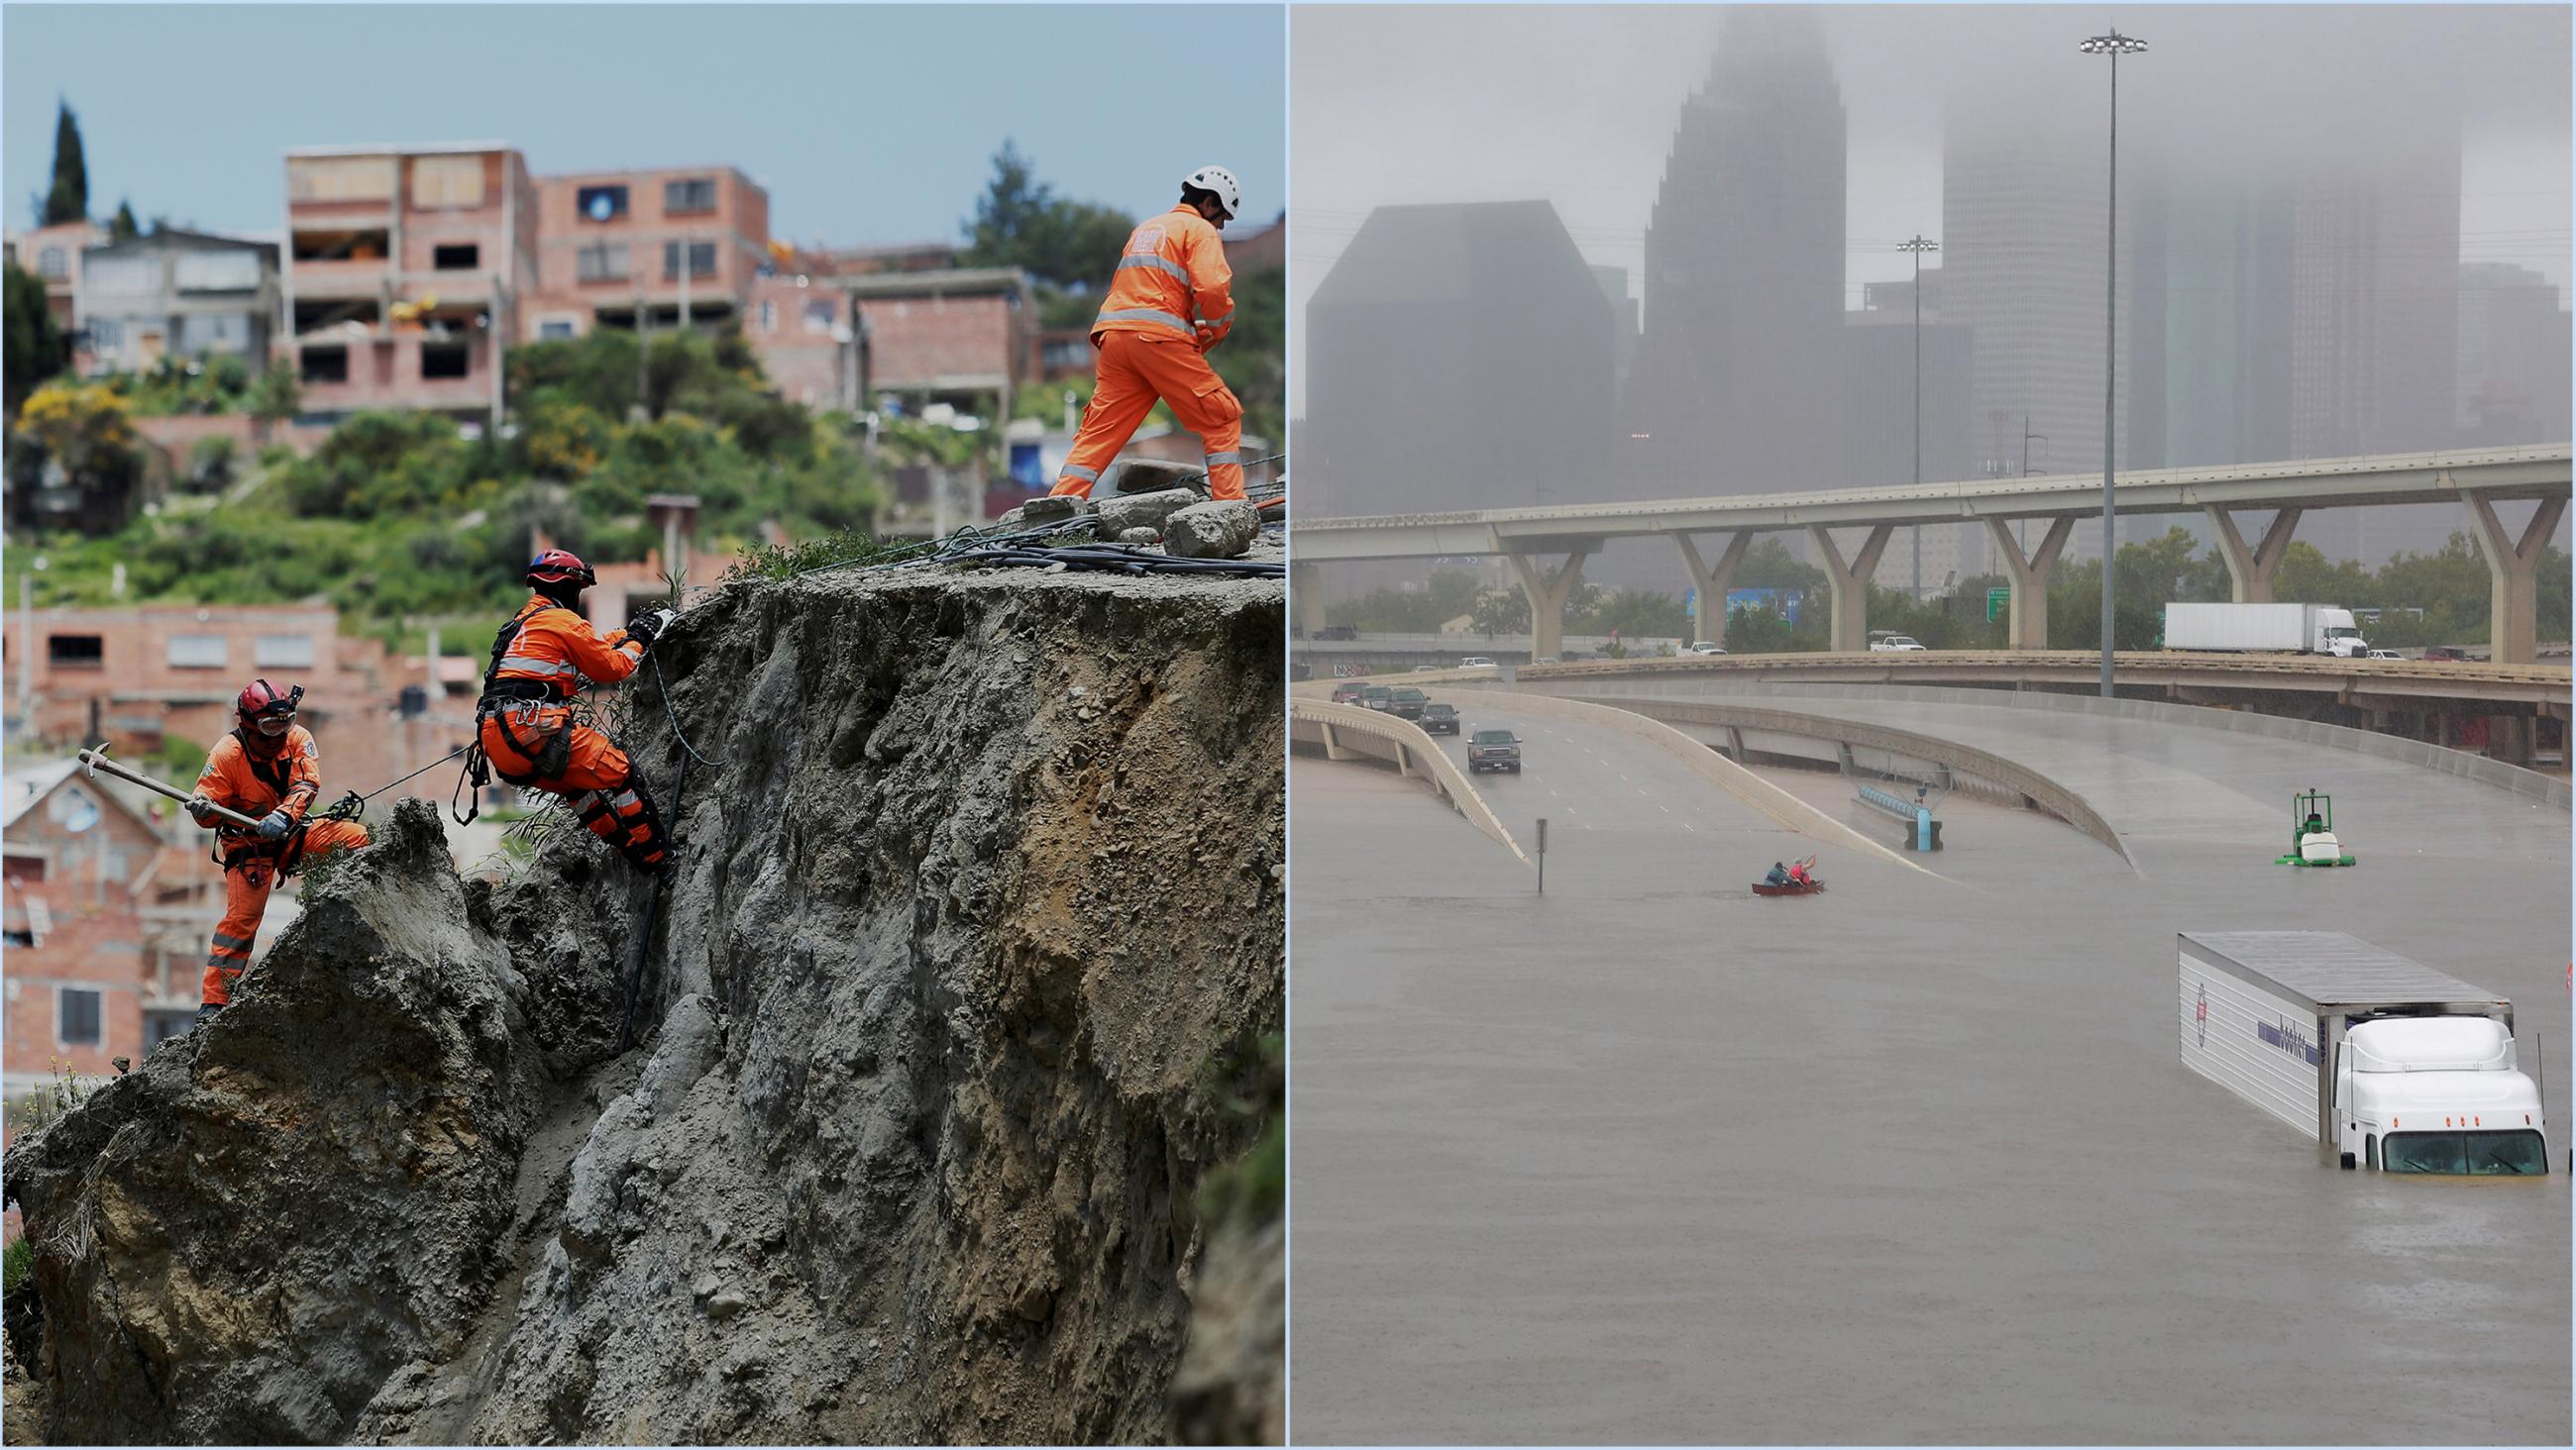 The photo is a split screen showing three men in orange jumpsuits scaling a landslide and a highway interchange flooded so much that an 18-wheeler truck is submerged to its cab. 